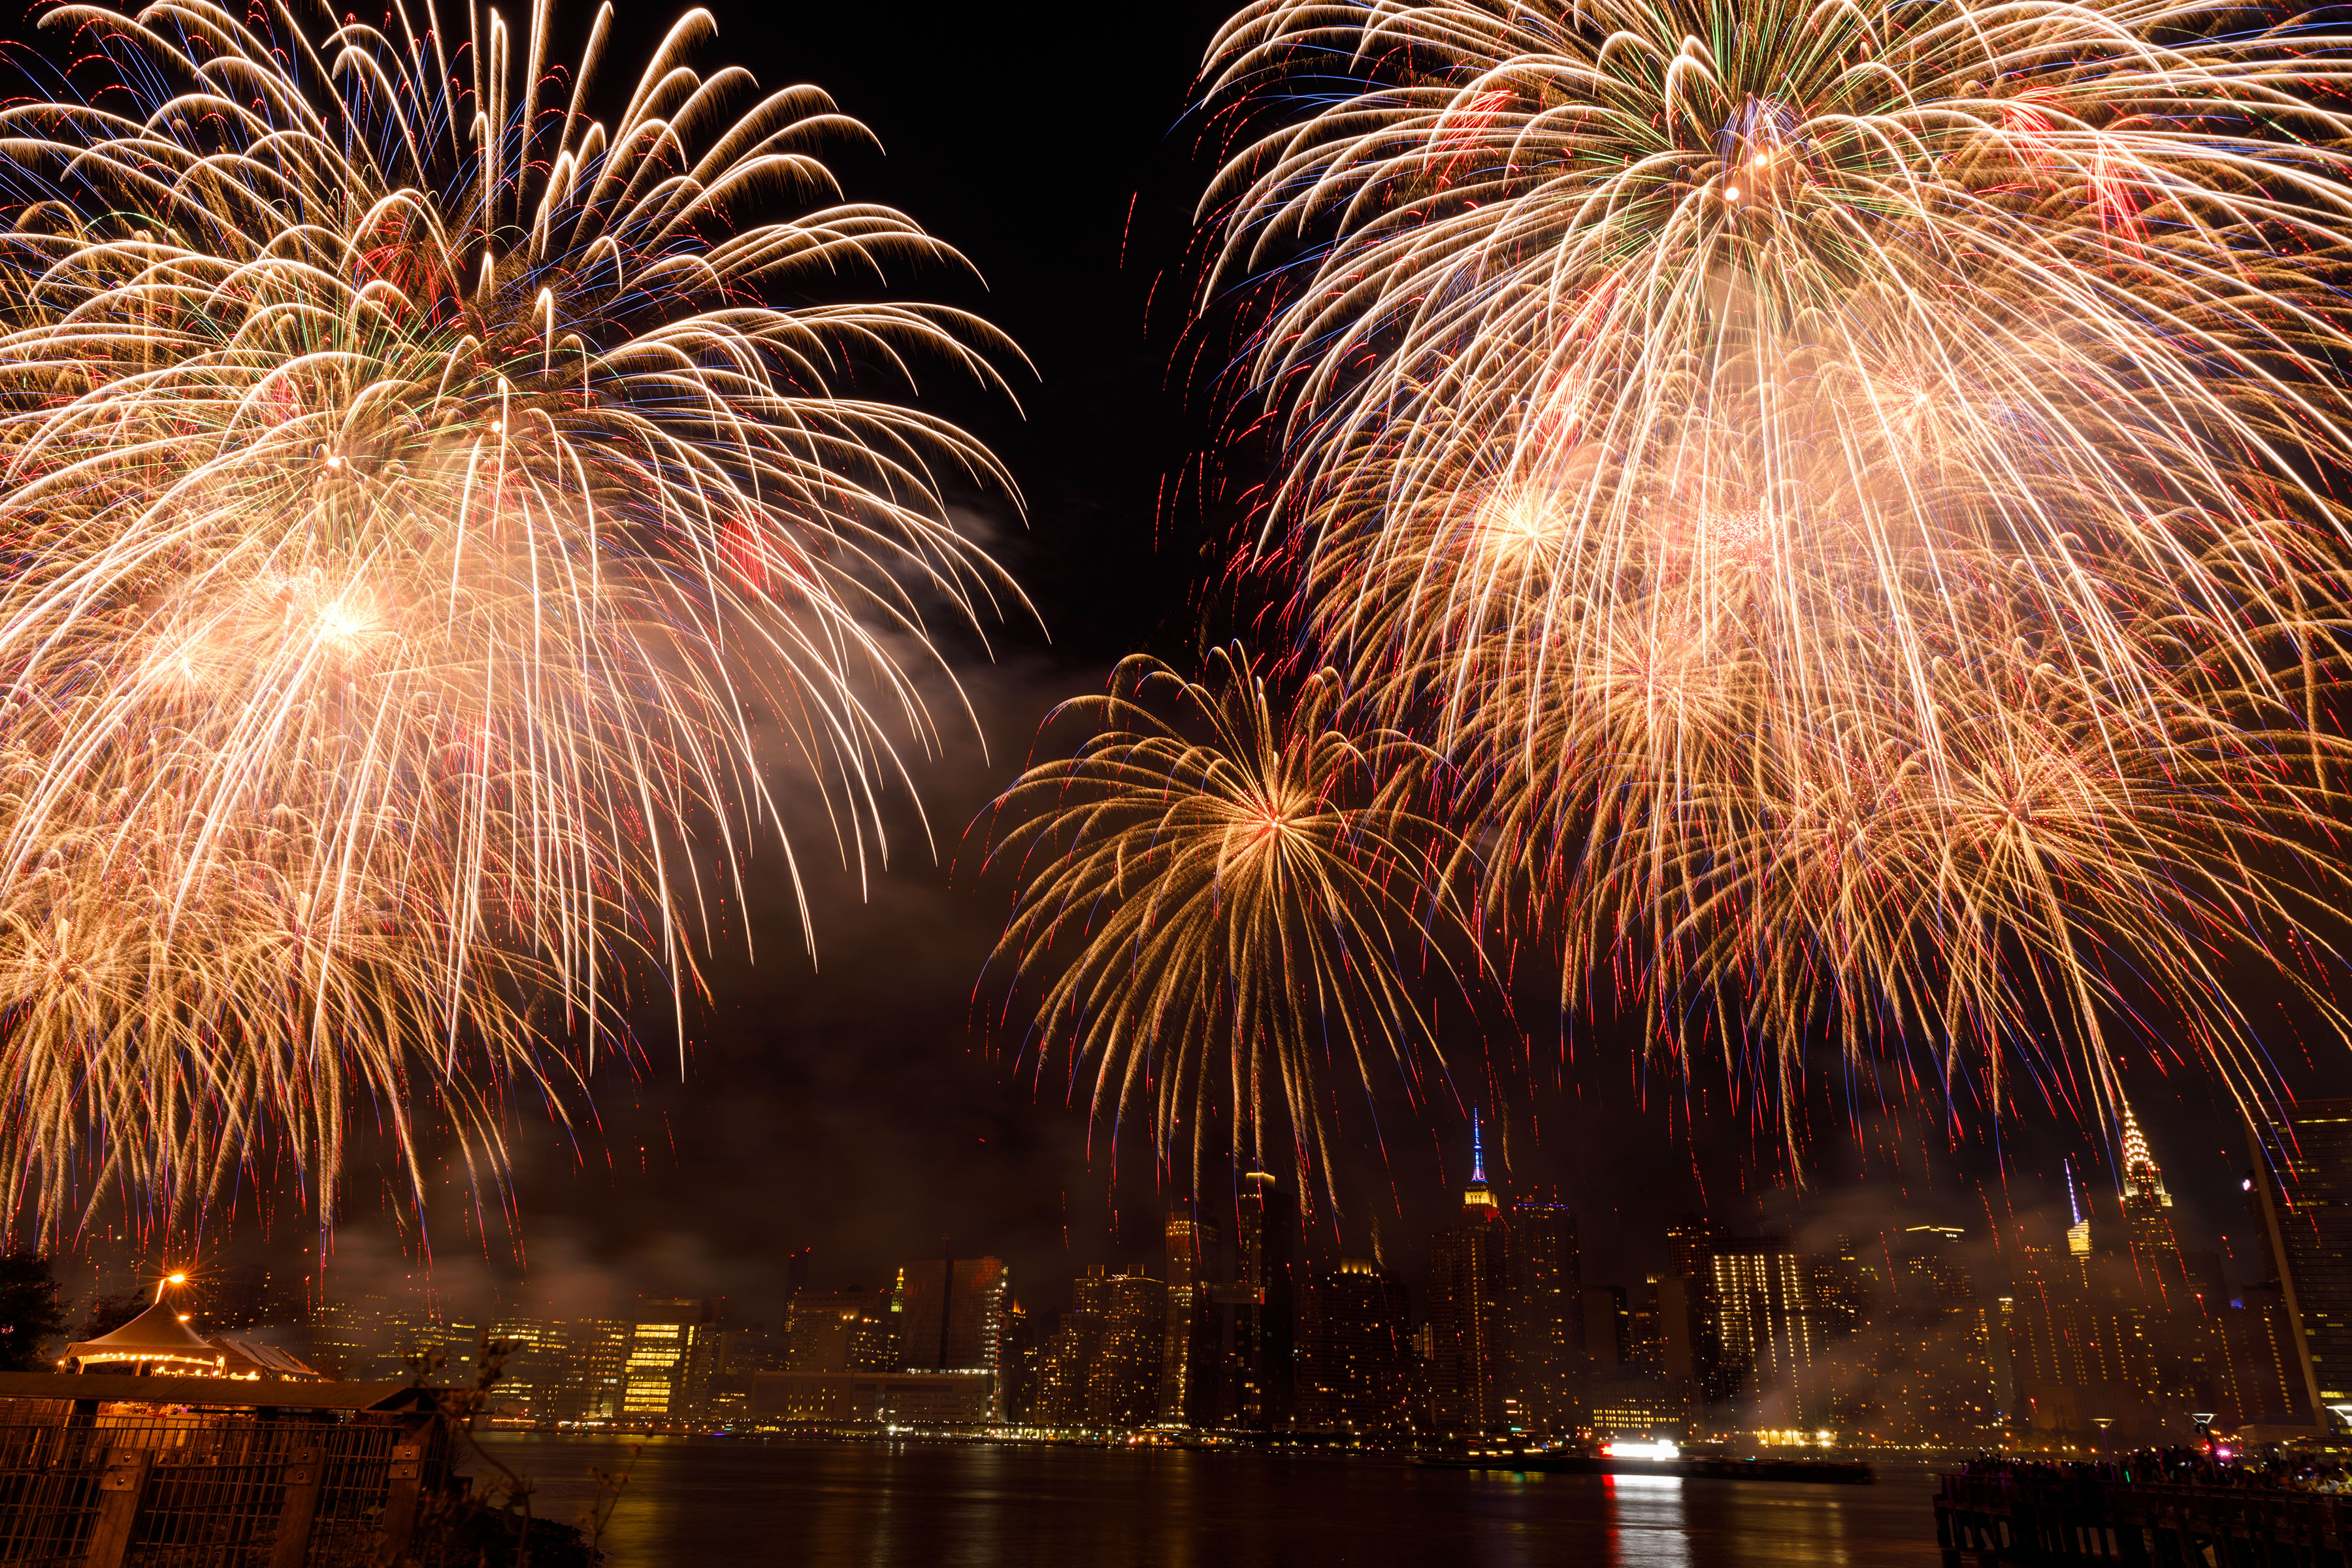 Macy's 4th of July Fireworks in New York in 2017. (Getty Images&mdash;2017 Jackson Lee)